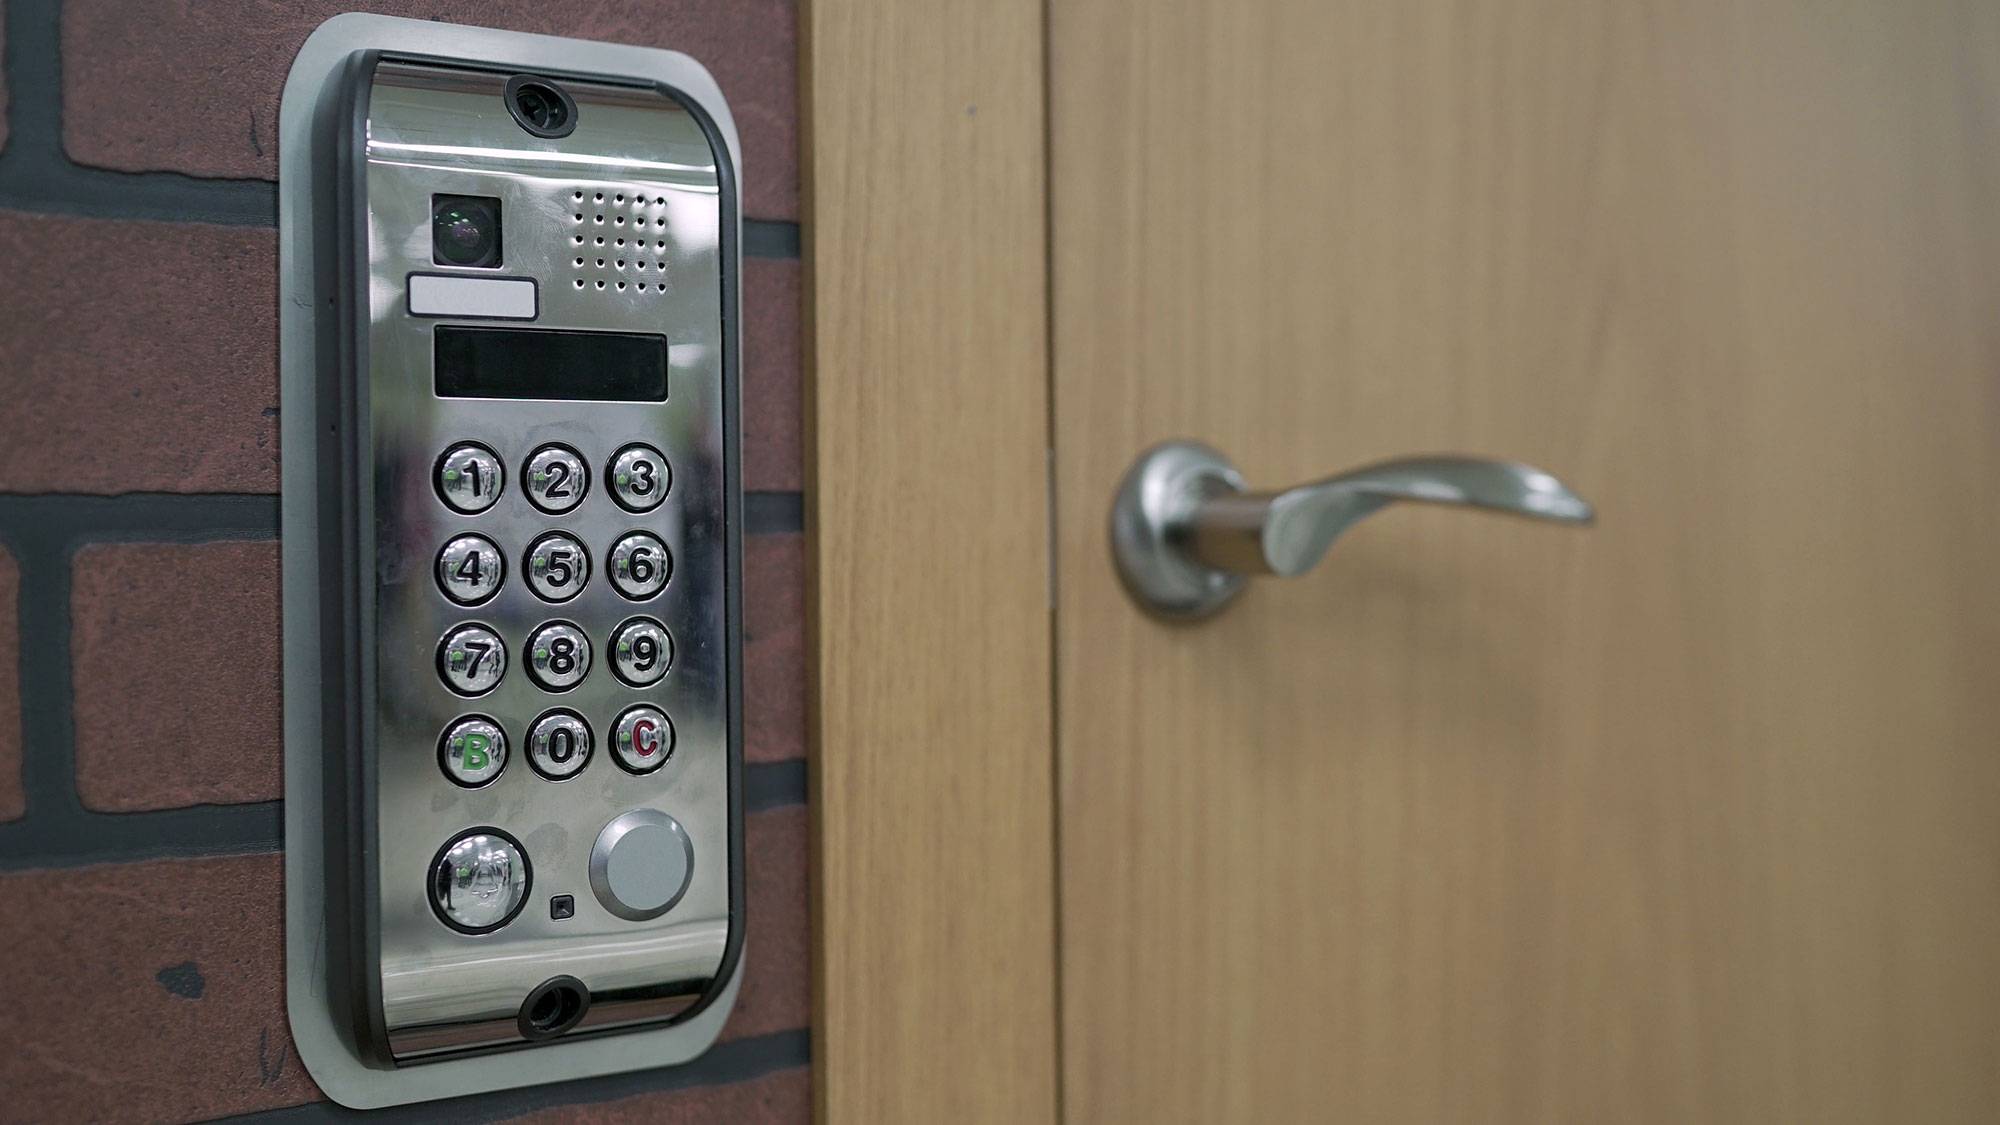 Keypad Electronic Access Control Systems Market – Know the Companies List Could Potentially Benefit or Loose out From the Impact of COVID-19 | Honeywell, ASSA Abloy, SIEMENS, TYCO, BOSCH Security